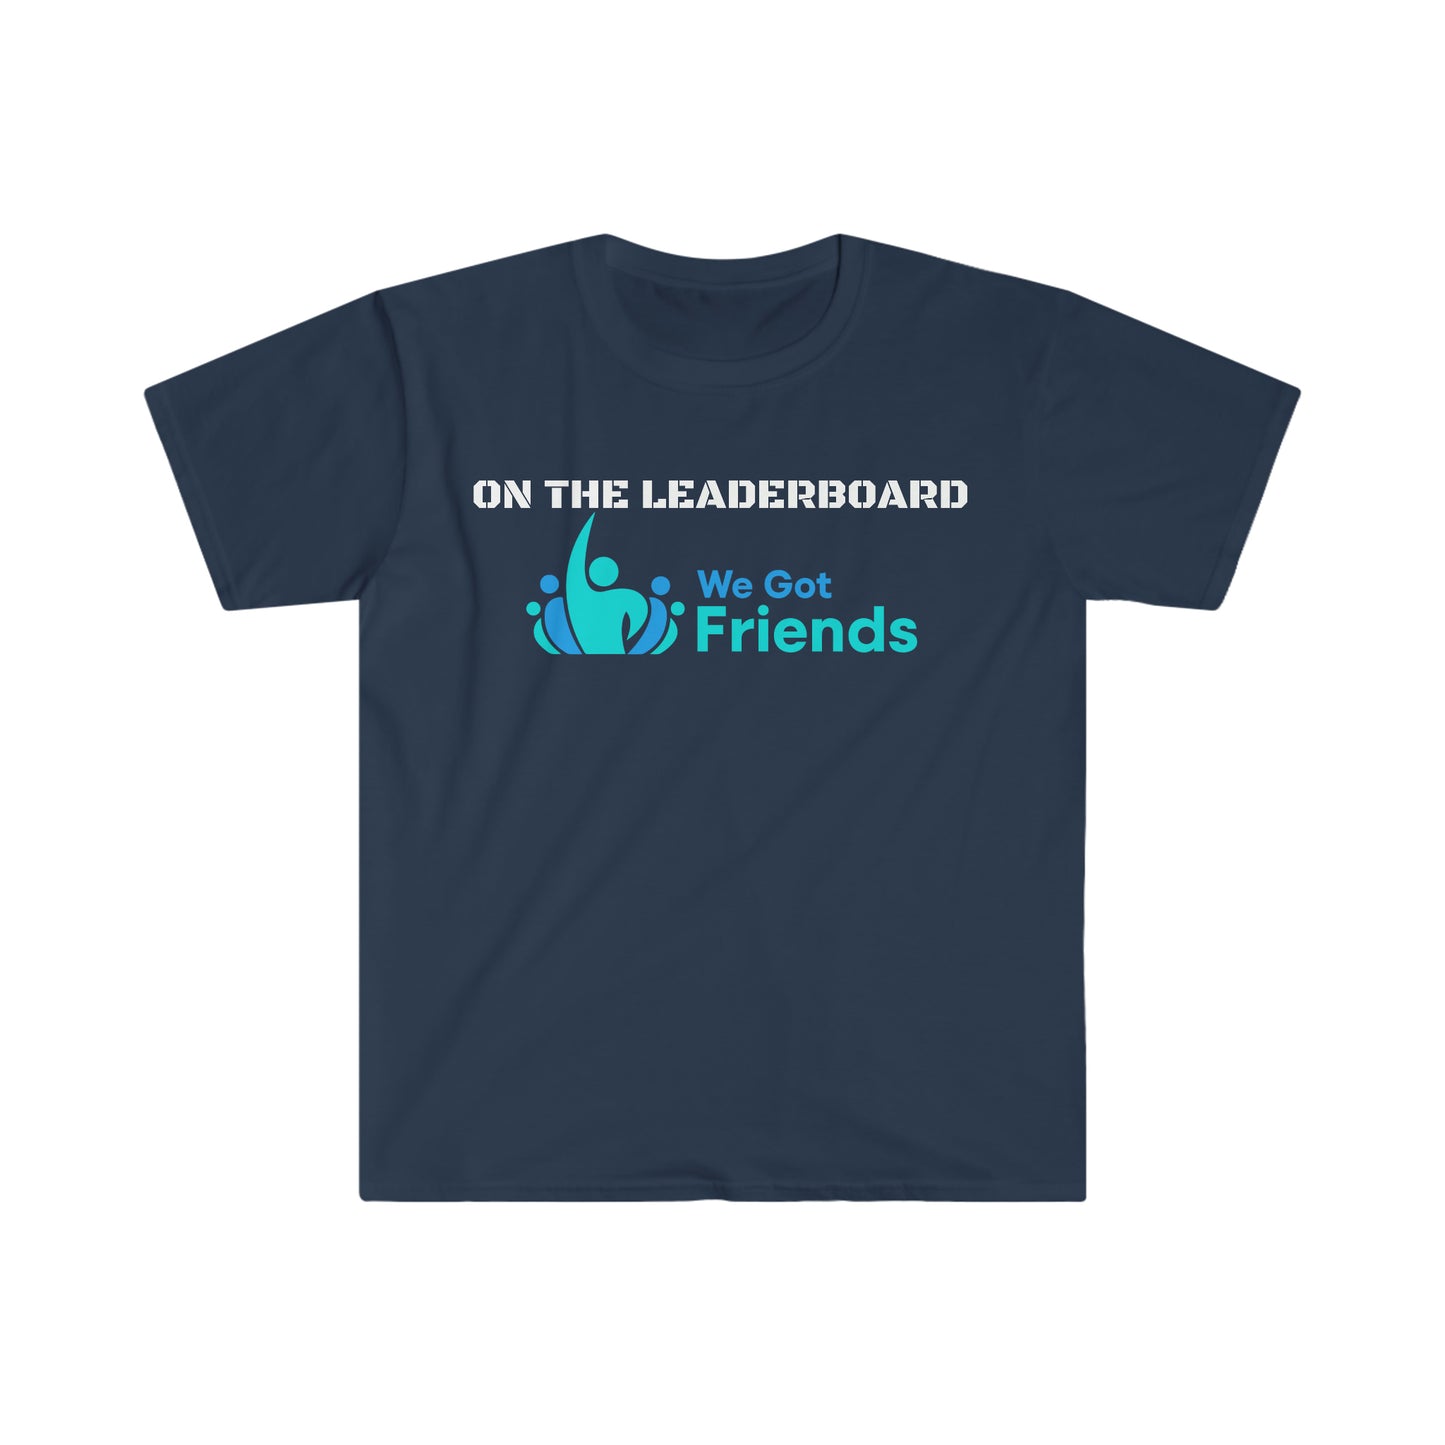 ON THE LEADERBOARD Unisex Softstyle T-Shirt